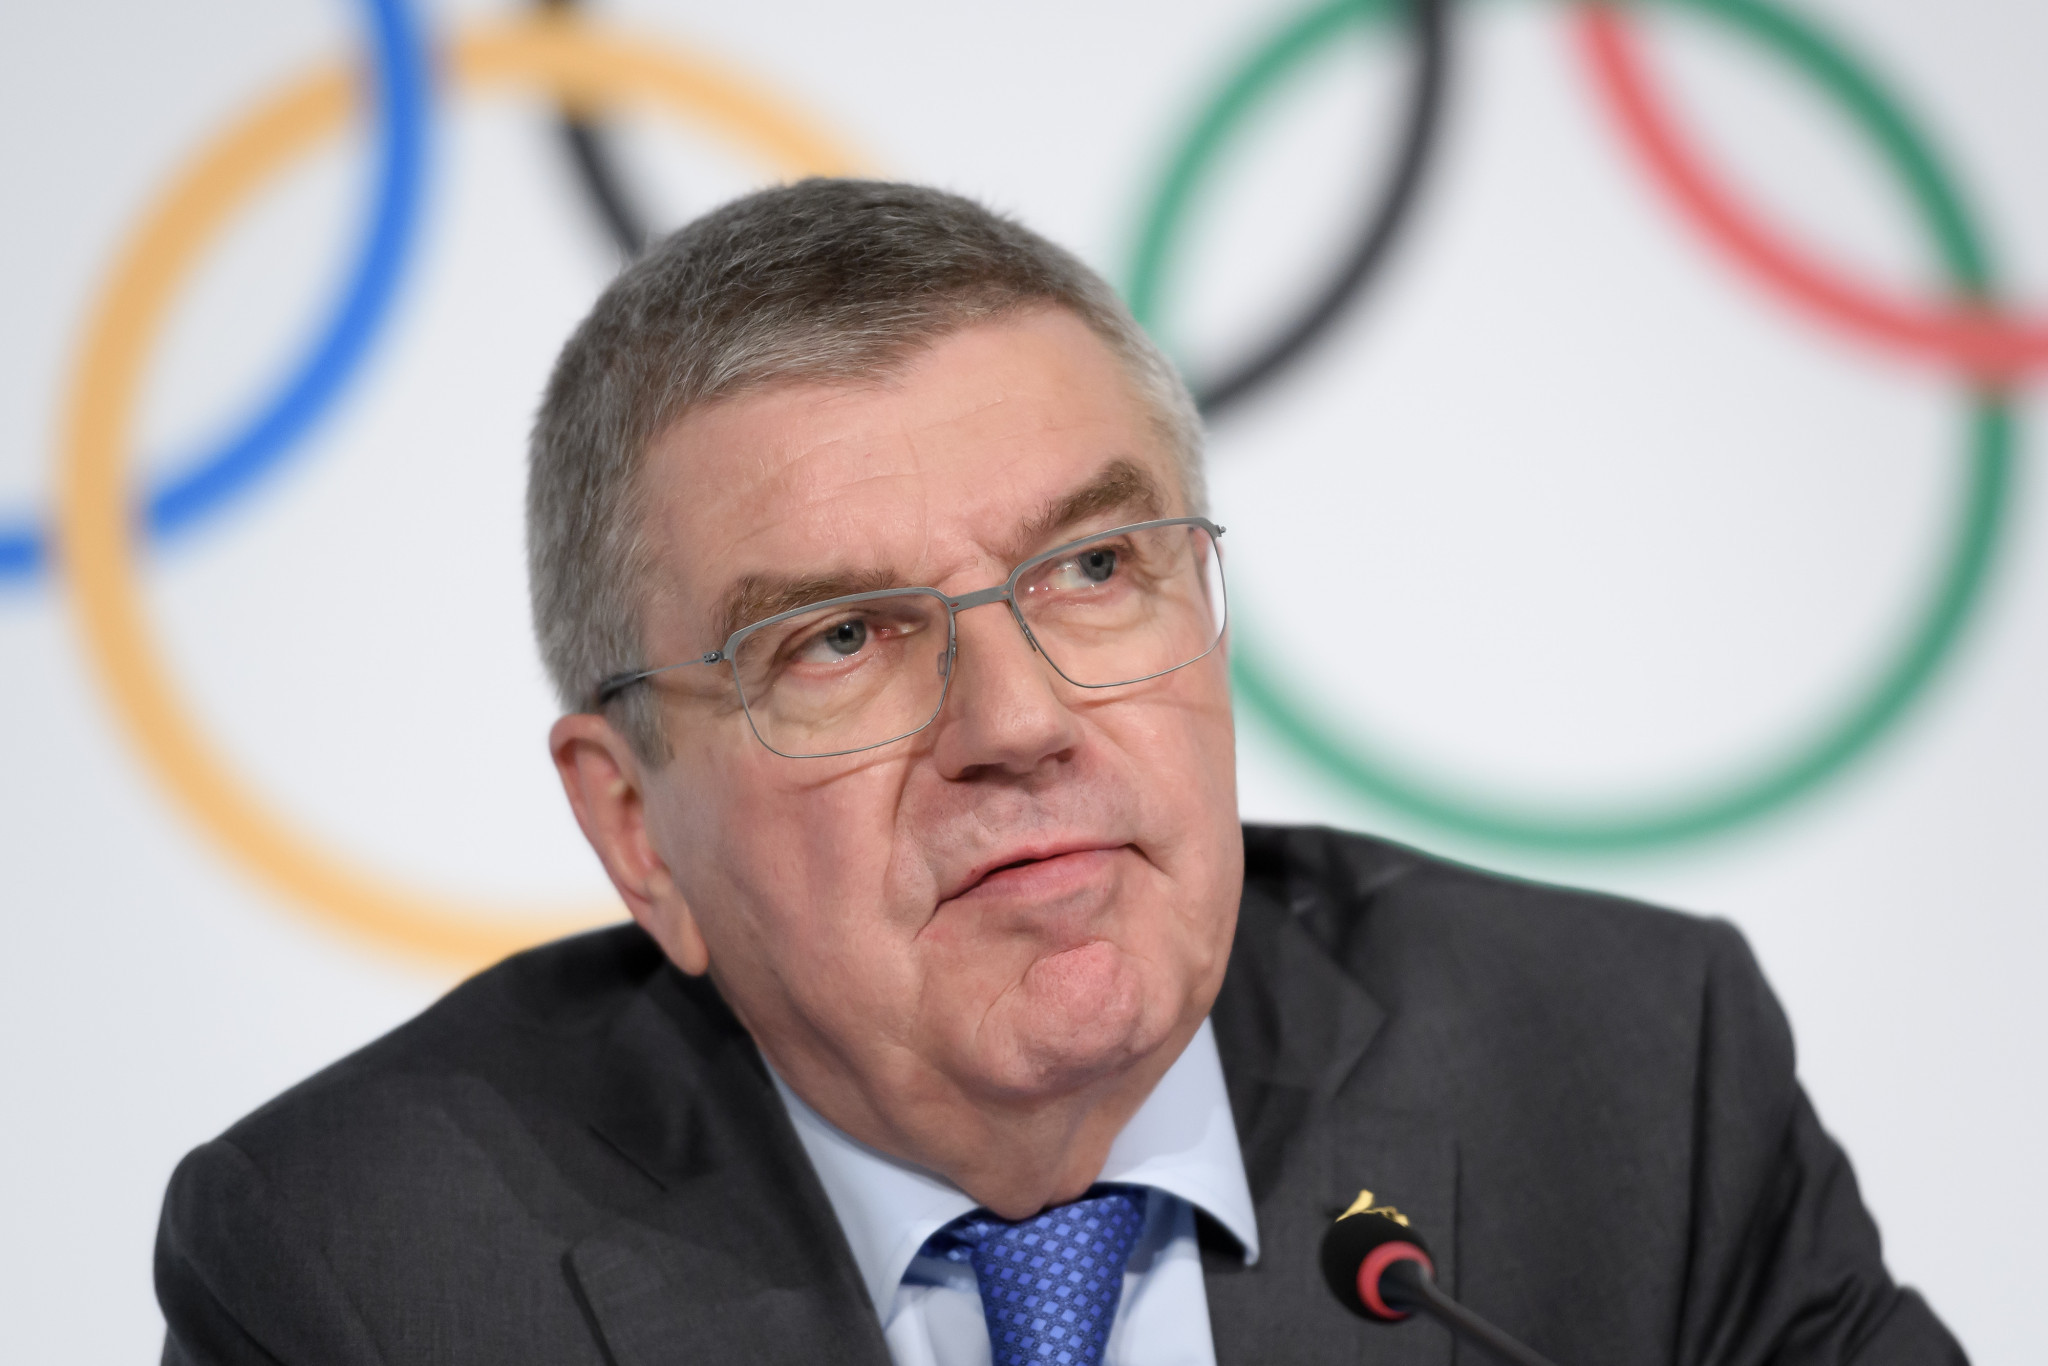 Thomas Bach said the IOC is bound by the decision taken by WADA ©Getty Images